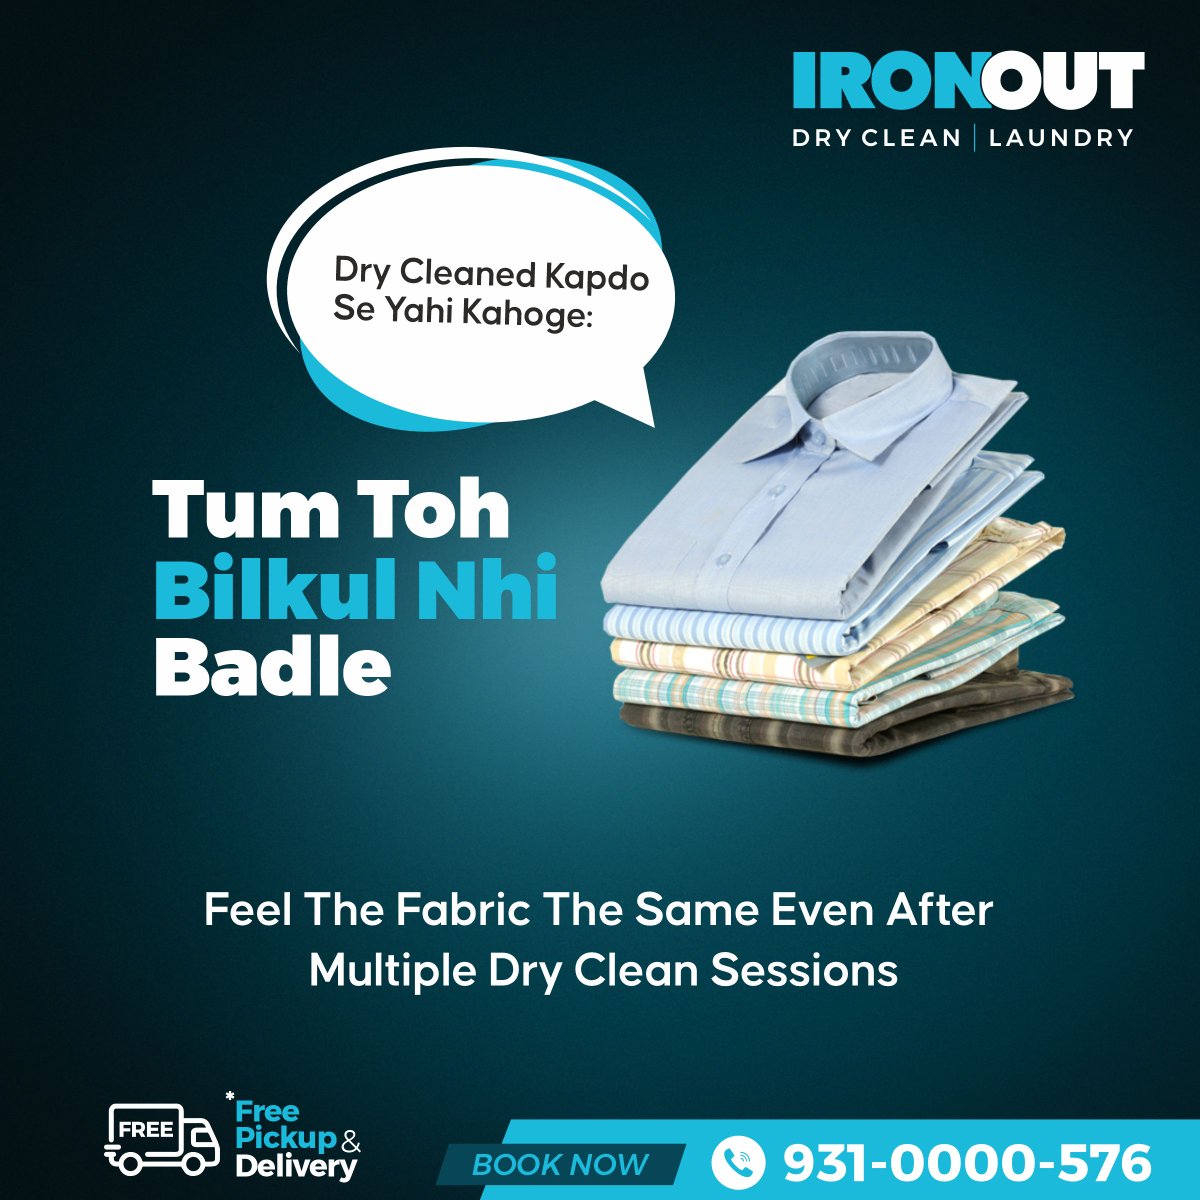 Rakhe apke kapdo ko naya jaisa humesha.
Schedule a pickup for dry cleaning Now!
Call Now: 9310000576
.
.
.
#IronOut #IronOutofficial #IronOutdryclean #DryClean #OnlineDryClean #Bestdrycleaner #Booknow #Scheduleapickup #Greenchemicals #Skinfriendly #Professionaldrycleaning